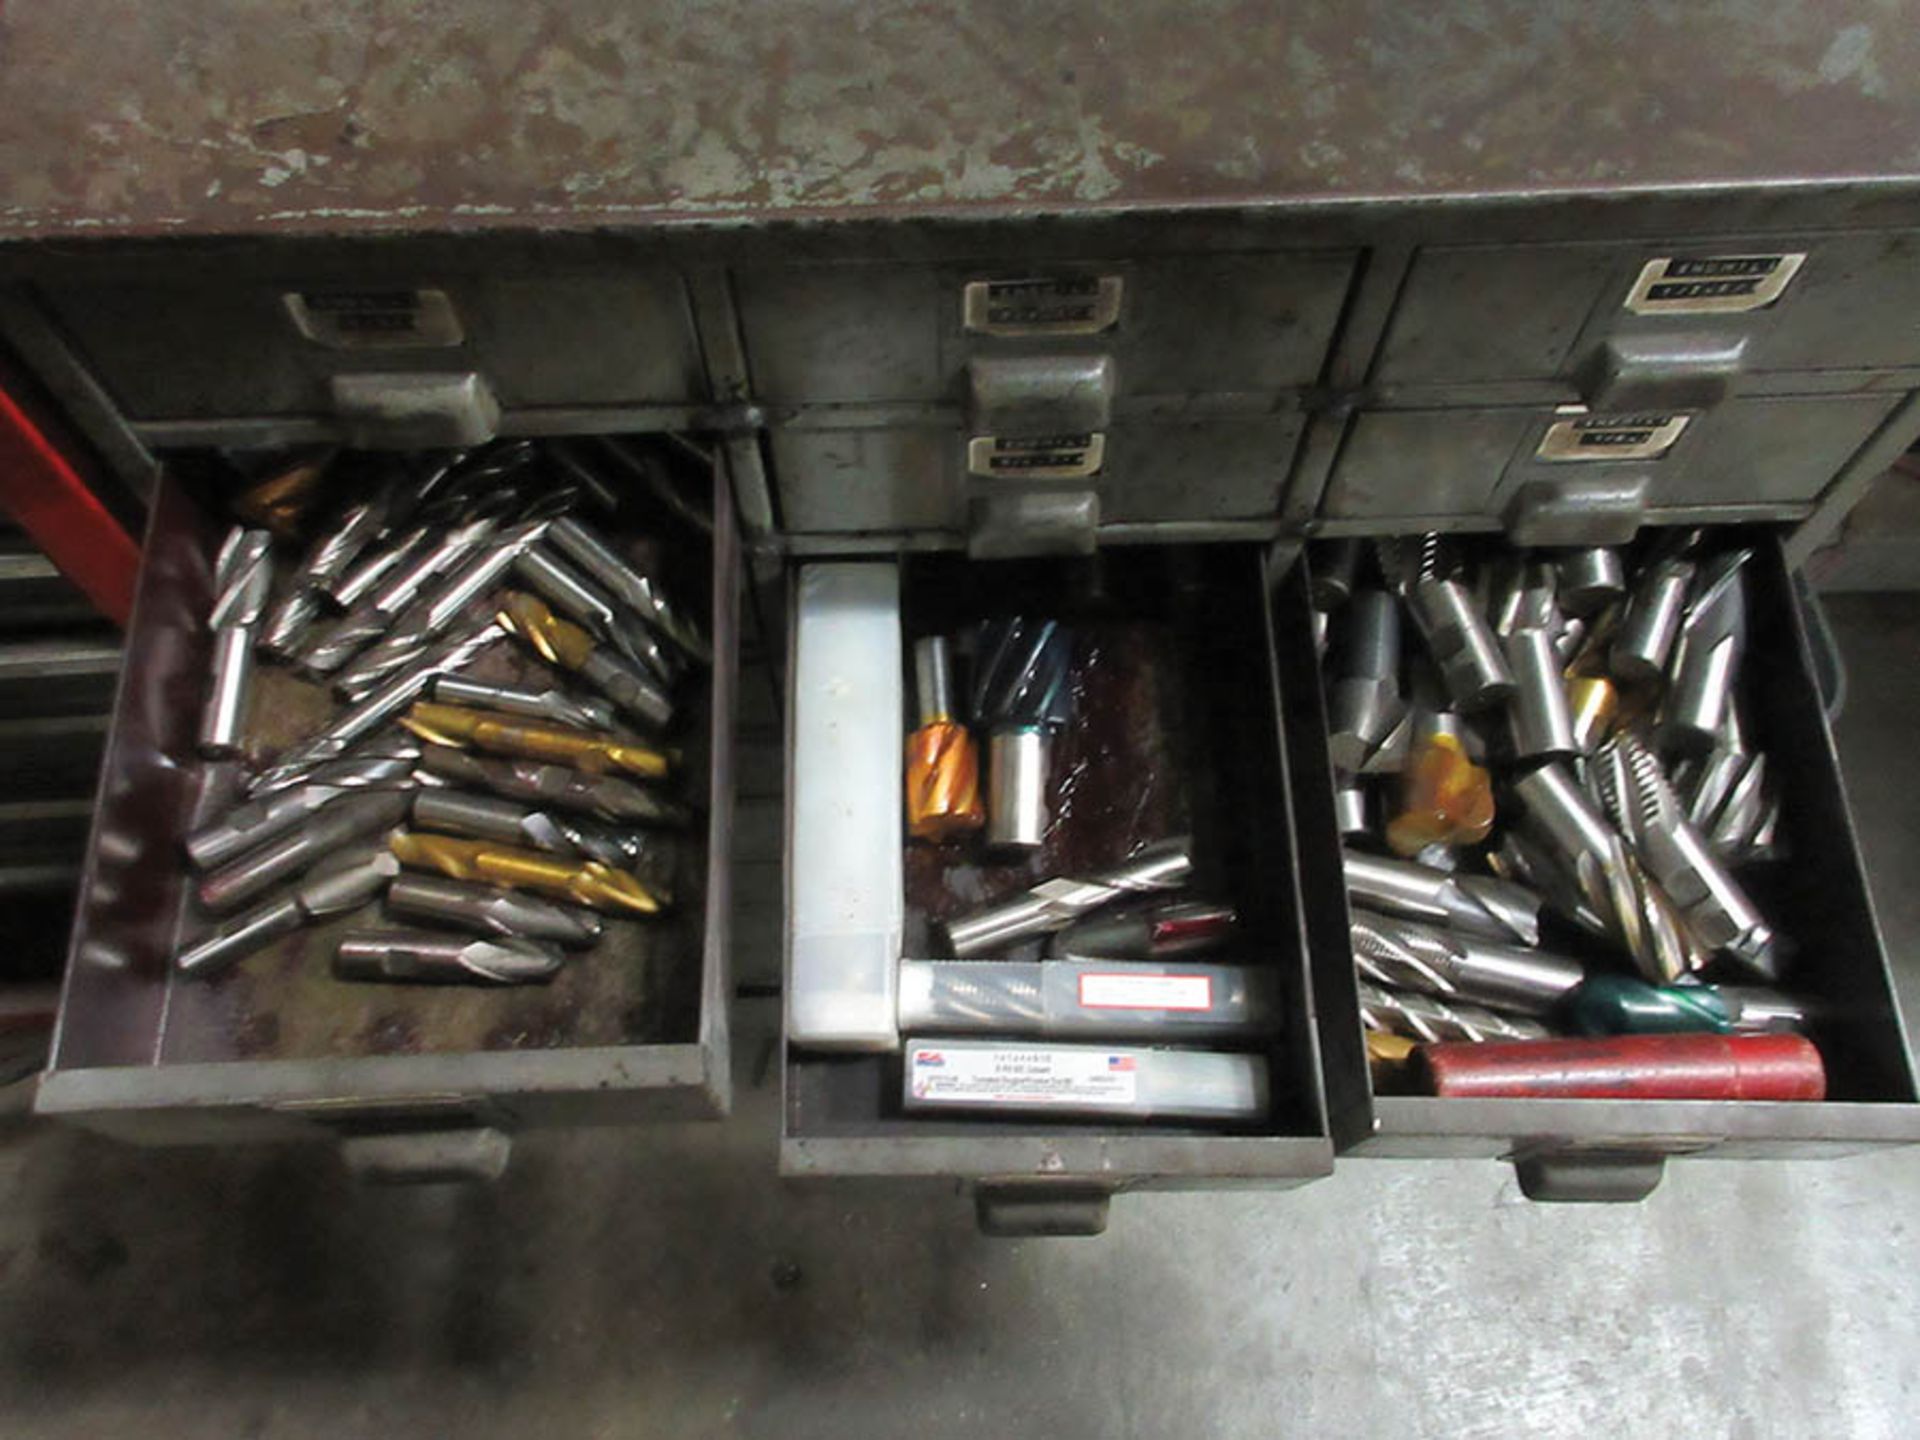 PARTS BIN, (3) HUOT DRILL INDEXES W/ DRILLS AND TAPS, END MILLS, H.S.S., SPECIAL CUTTERS, SAWS, - Image 3 of 4